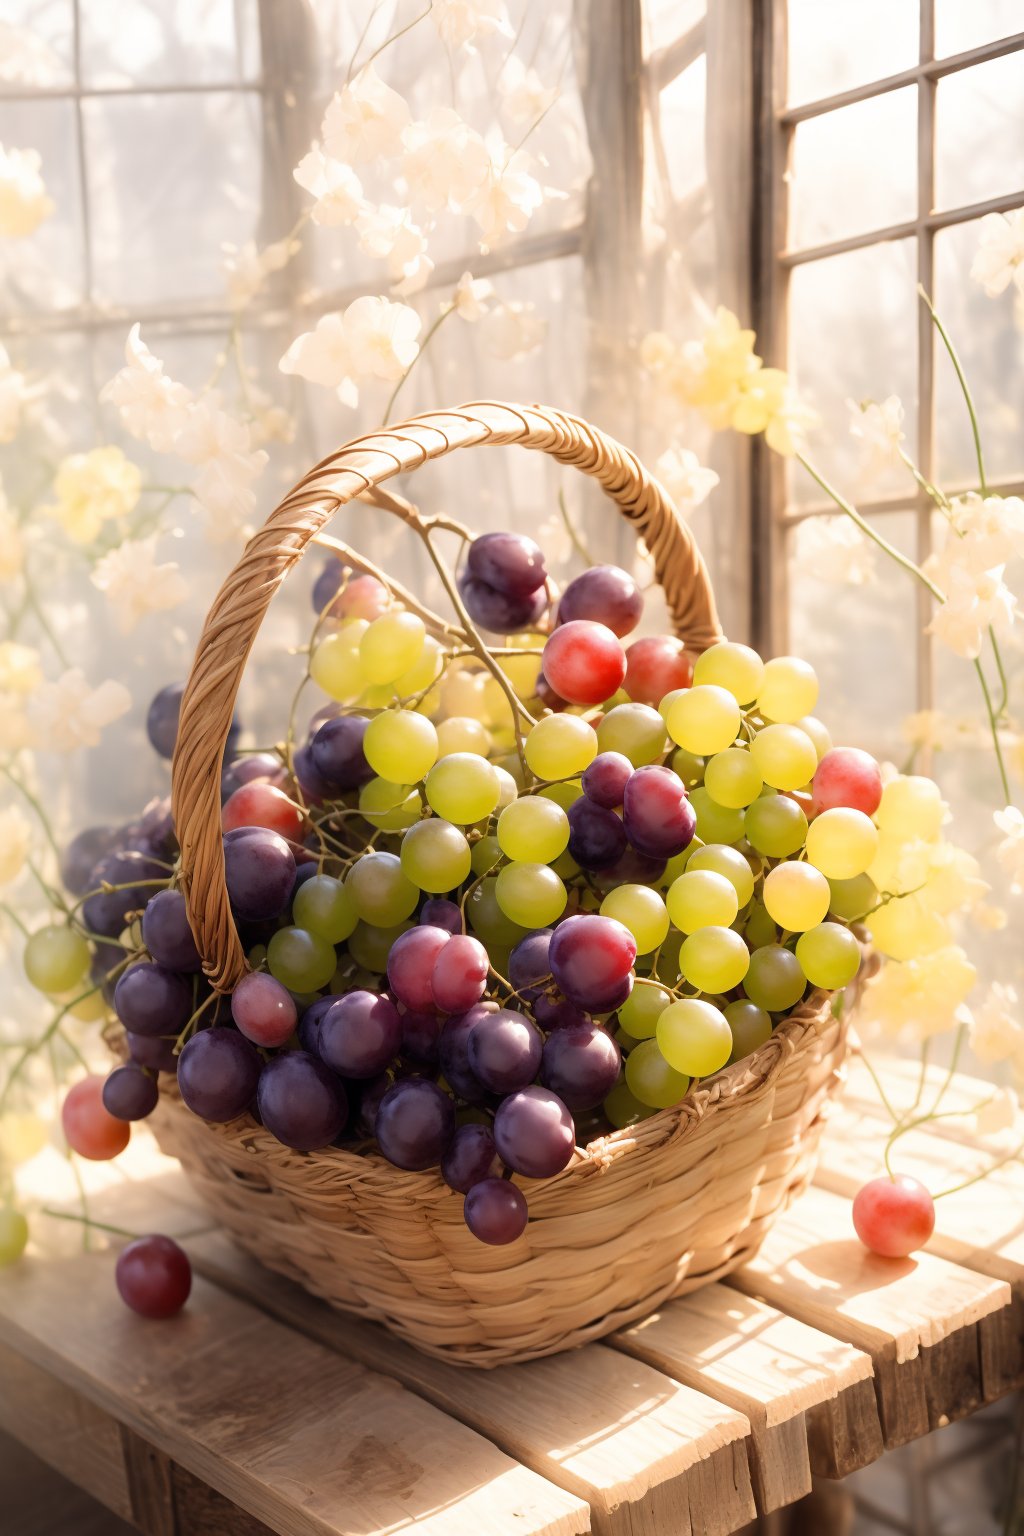 A still life of a bounty of plump, juicy grapes spilling out of a wicker basket on a rustic wooden table. Soft, warm sunlight filters through the window casting a gentle glow on the fruit's translucent skin. The camera frames the arrangement from directly above, showcasing the vibrant purple hue and the way the grapes seem to tumble into a natural heap.,1 girl